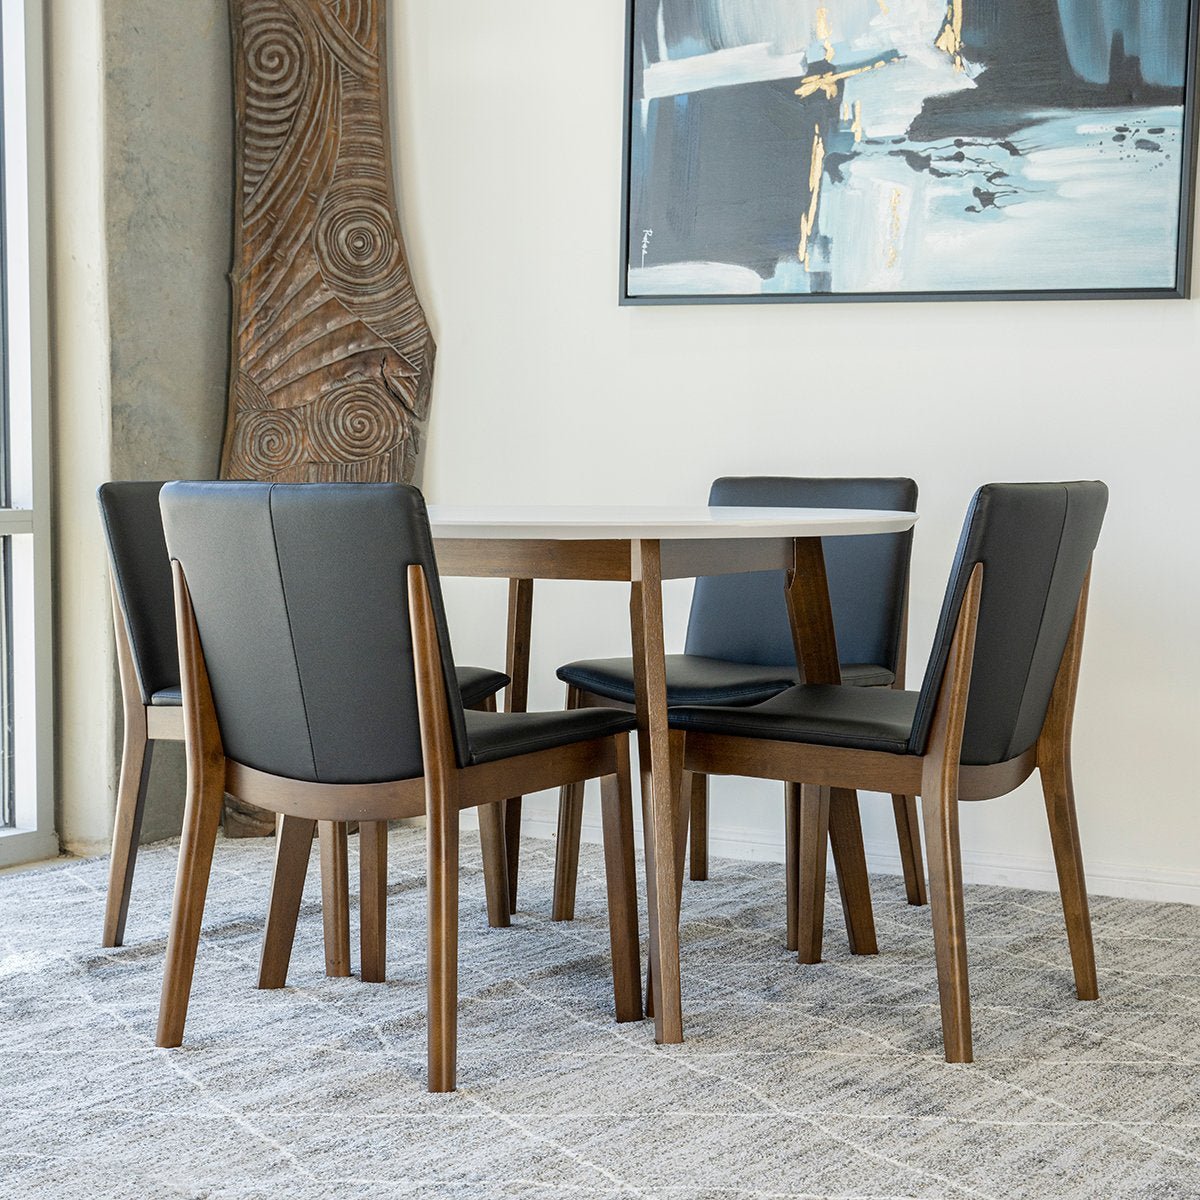 Aliana (White) Dining Set with 4 Virginia (Black Leather) Chairs